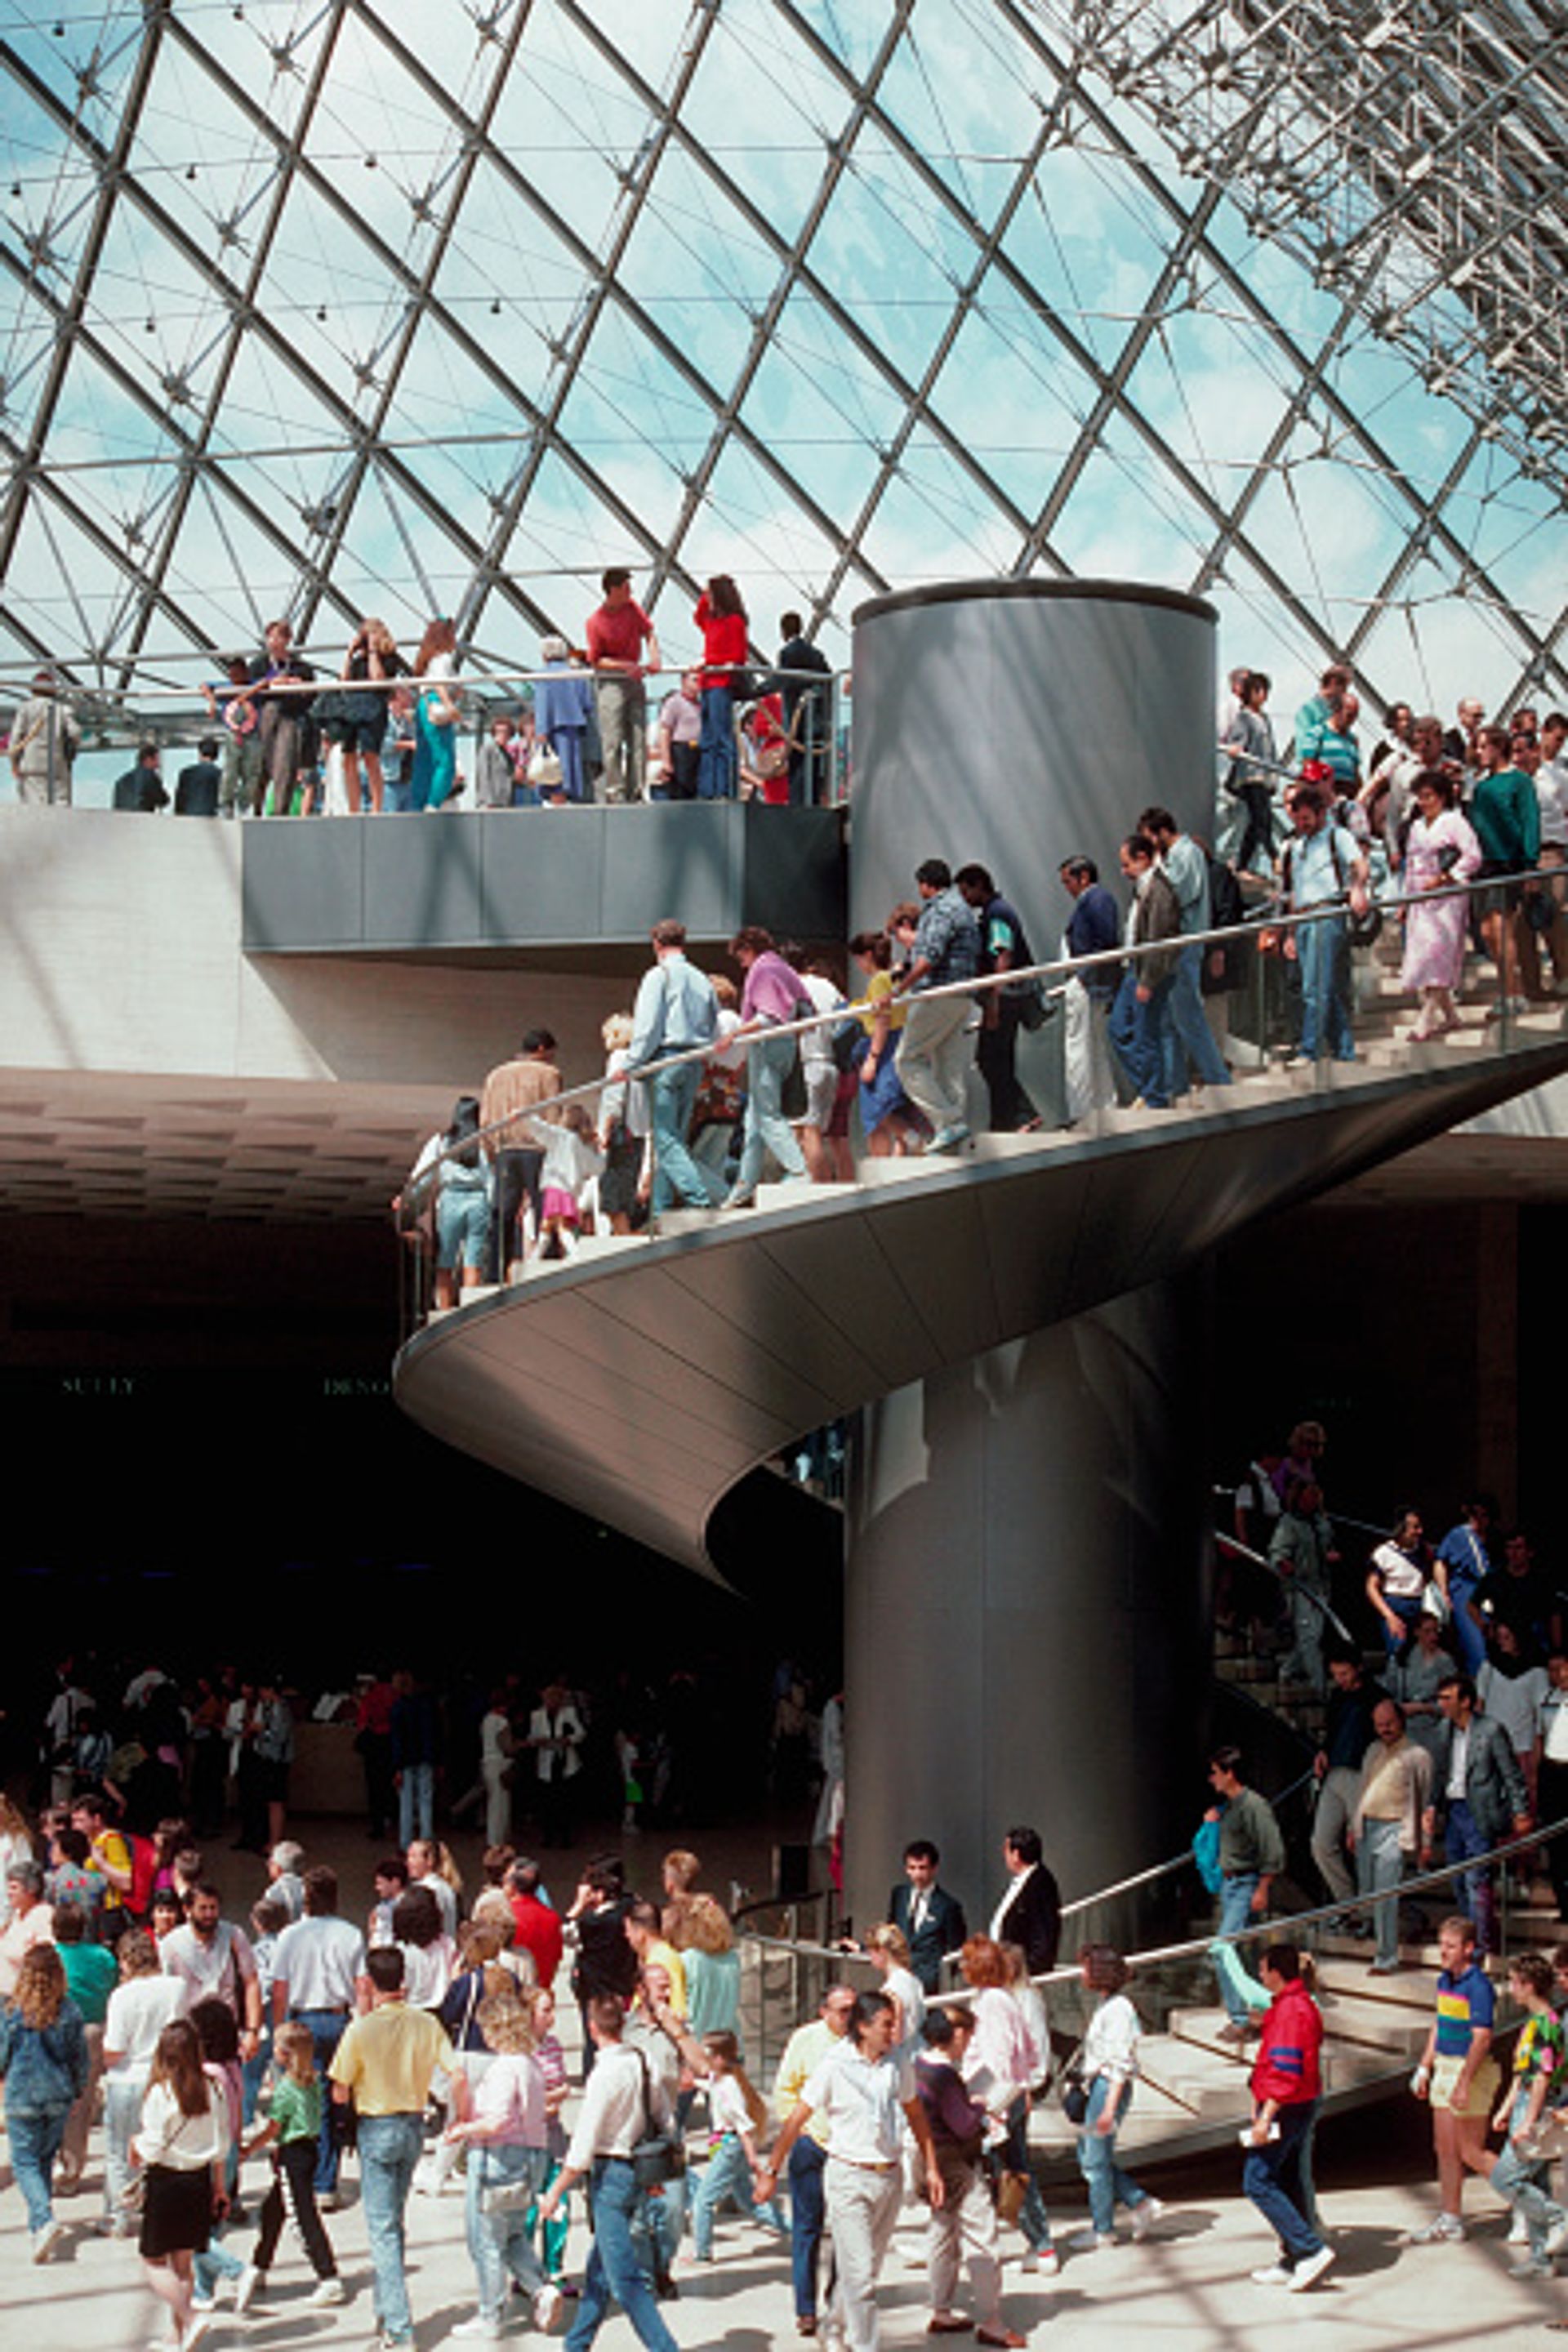 The rise of mass tourism has been a defining challenge for museums in recent decades: here, crowds of visitors at the Louvre in 1990 © Ted Streshinsky/Corbis/Corbis via Getty Images